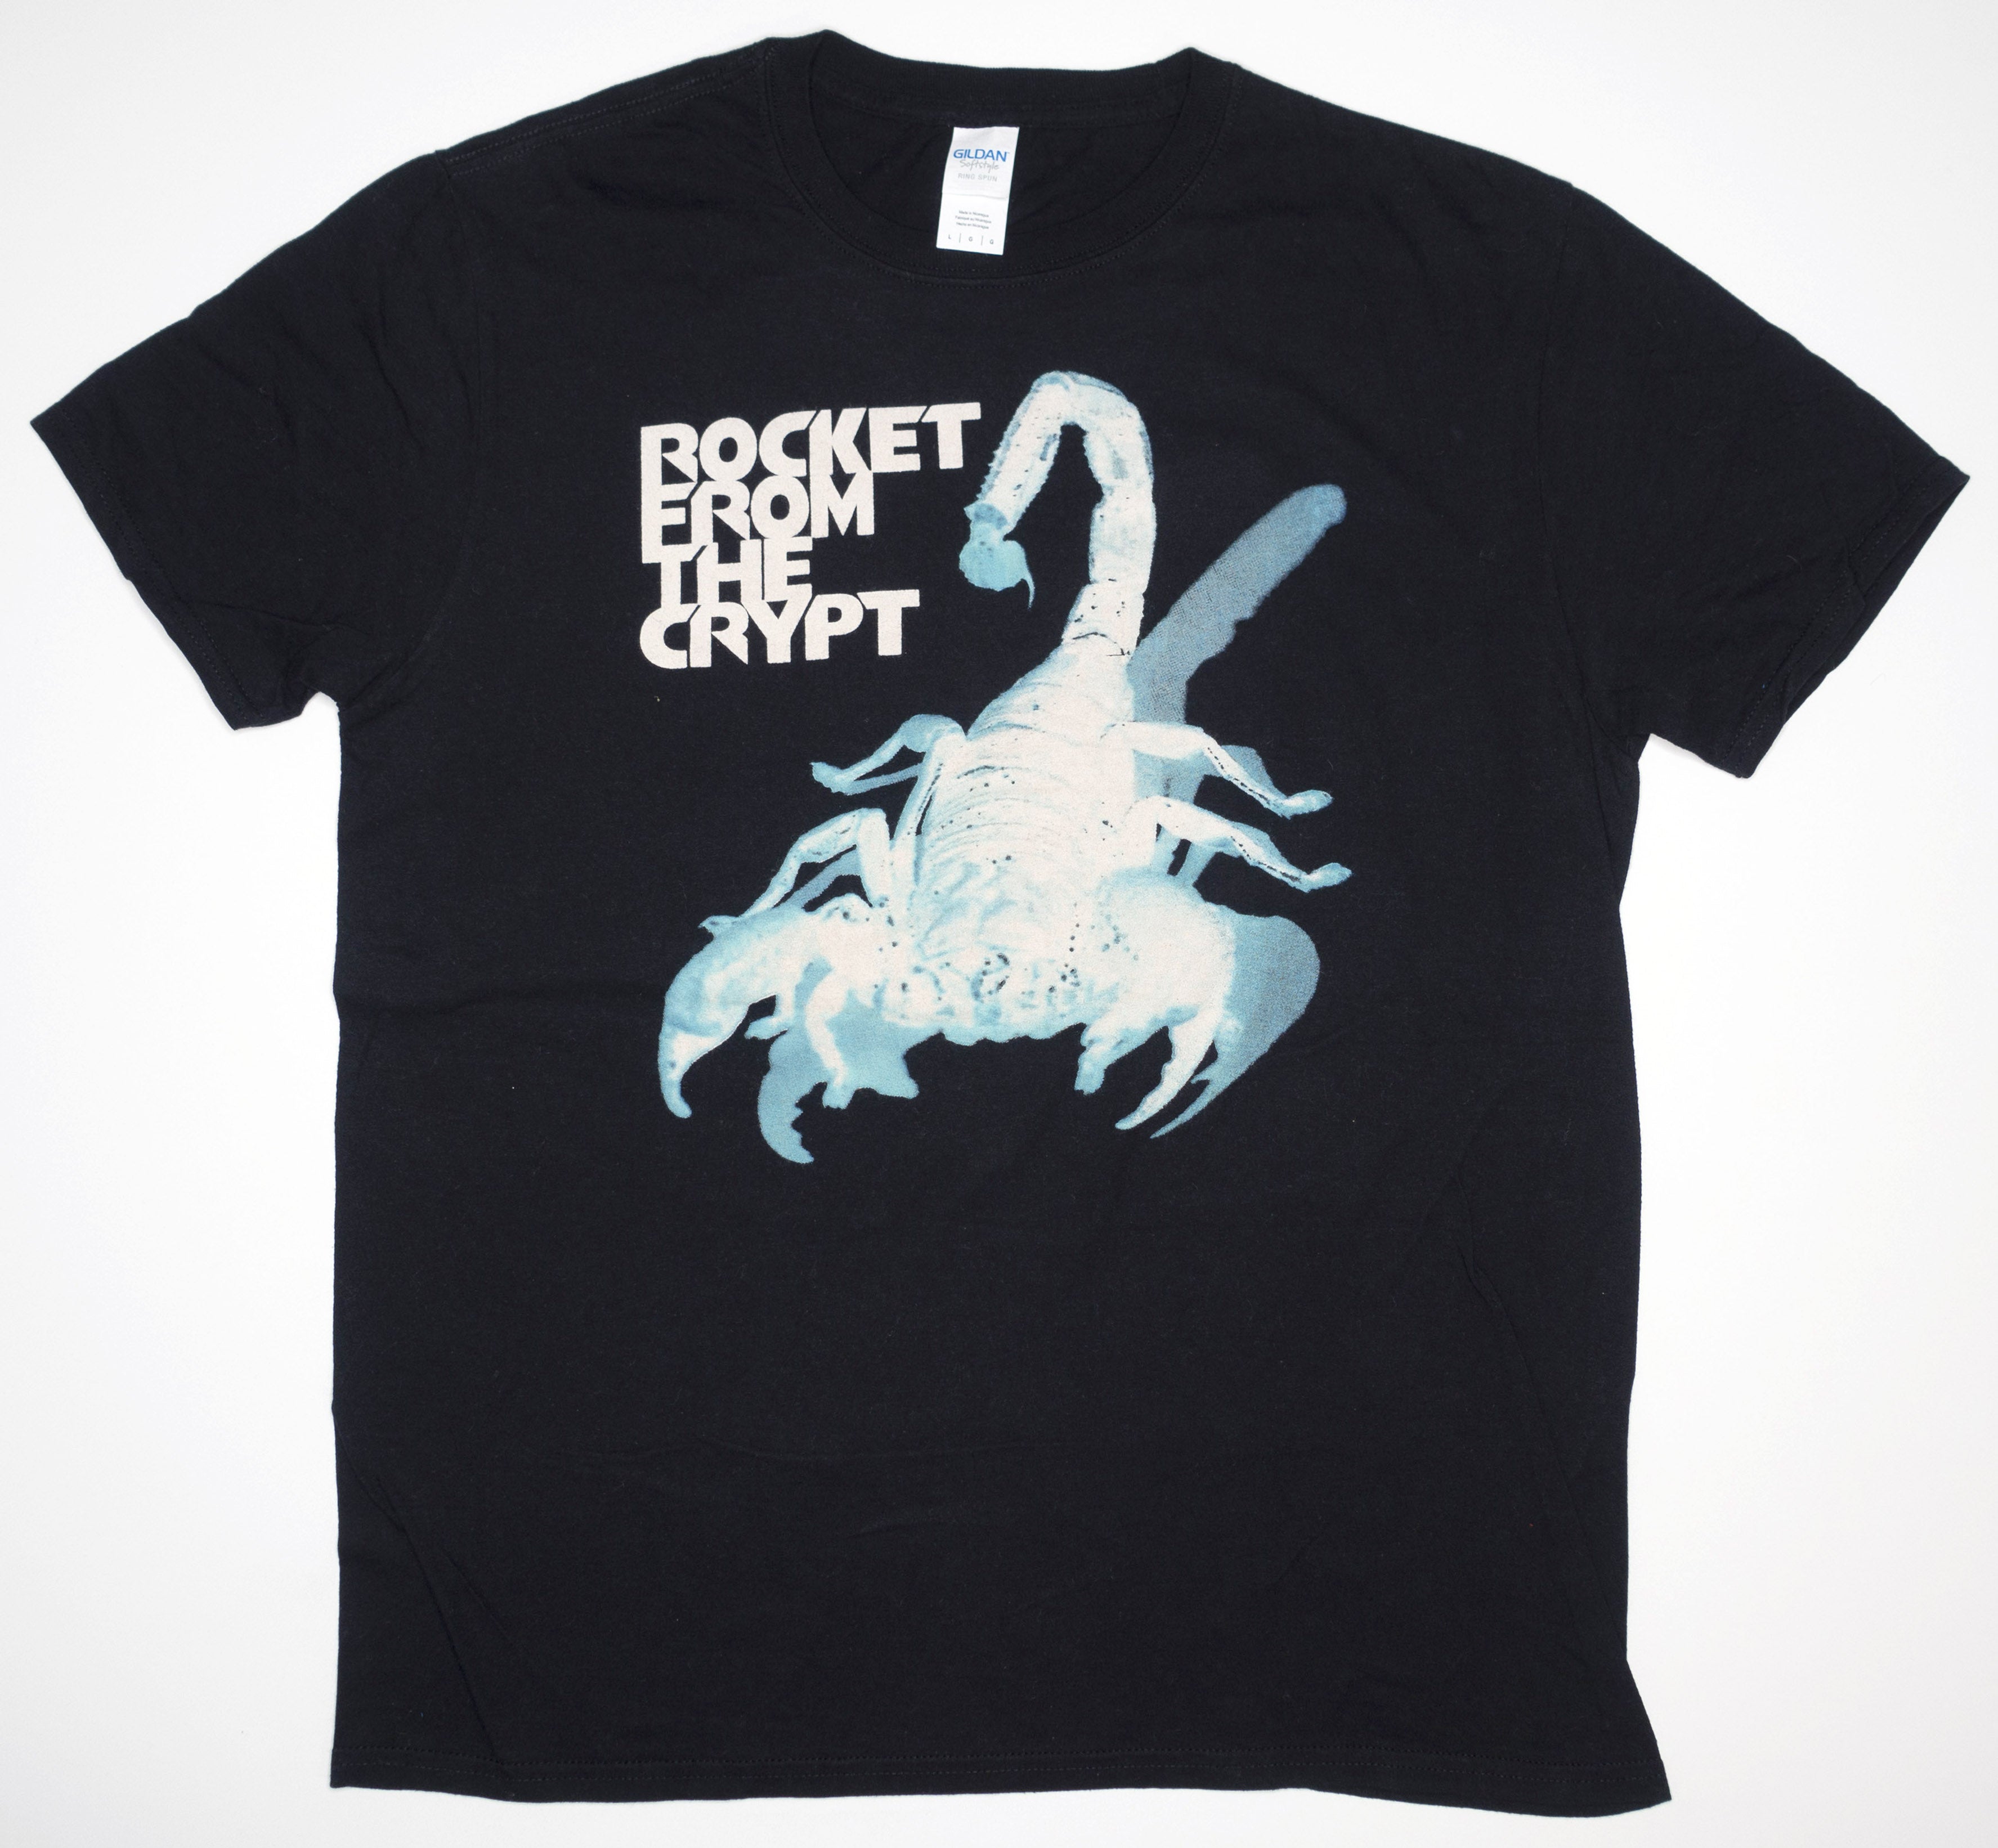 Rocket From the Crypt - Scream, Dracula, Scream! RFTC Webstore Re-issue Shirt Size Large